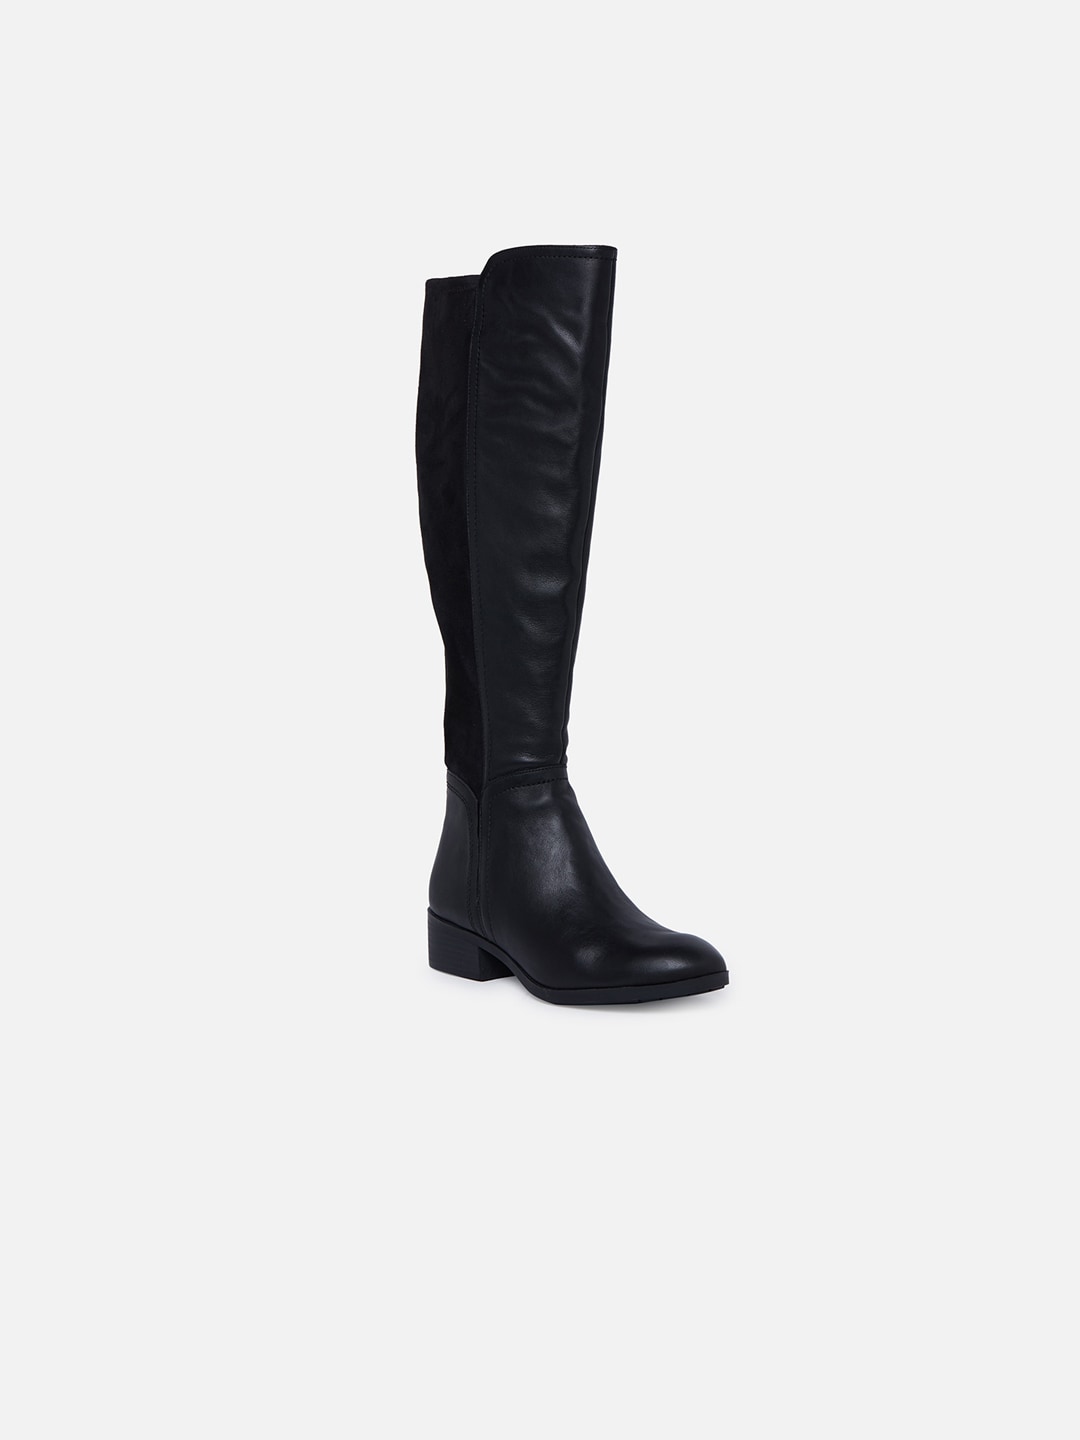 ALDO Women Black Solid Heeled Boots Price in India